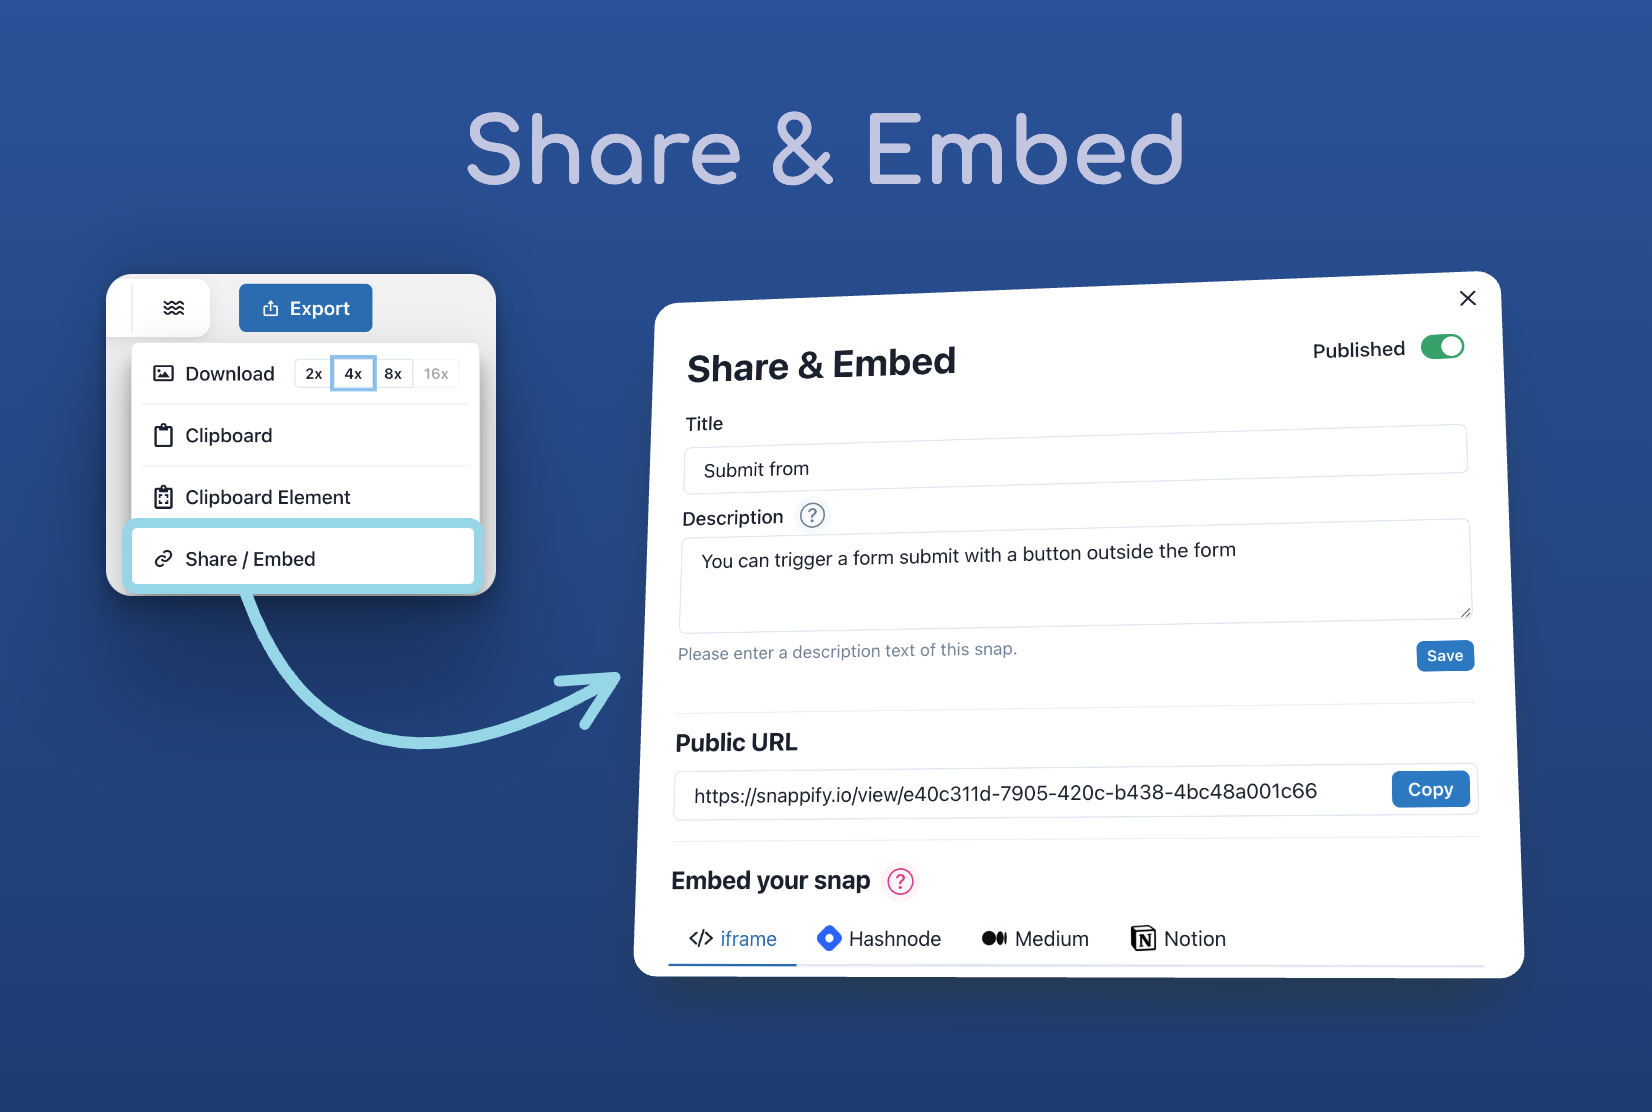 Promotion Image showcasing the new Share & Embed modal